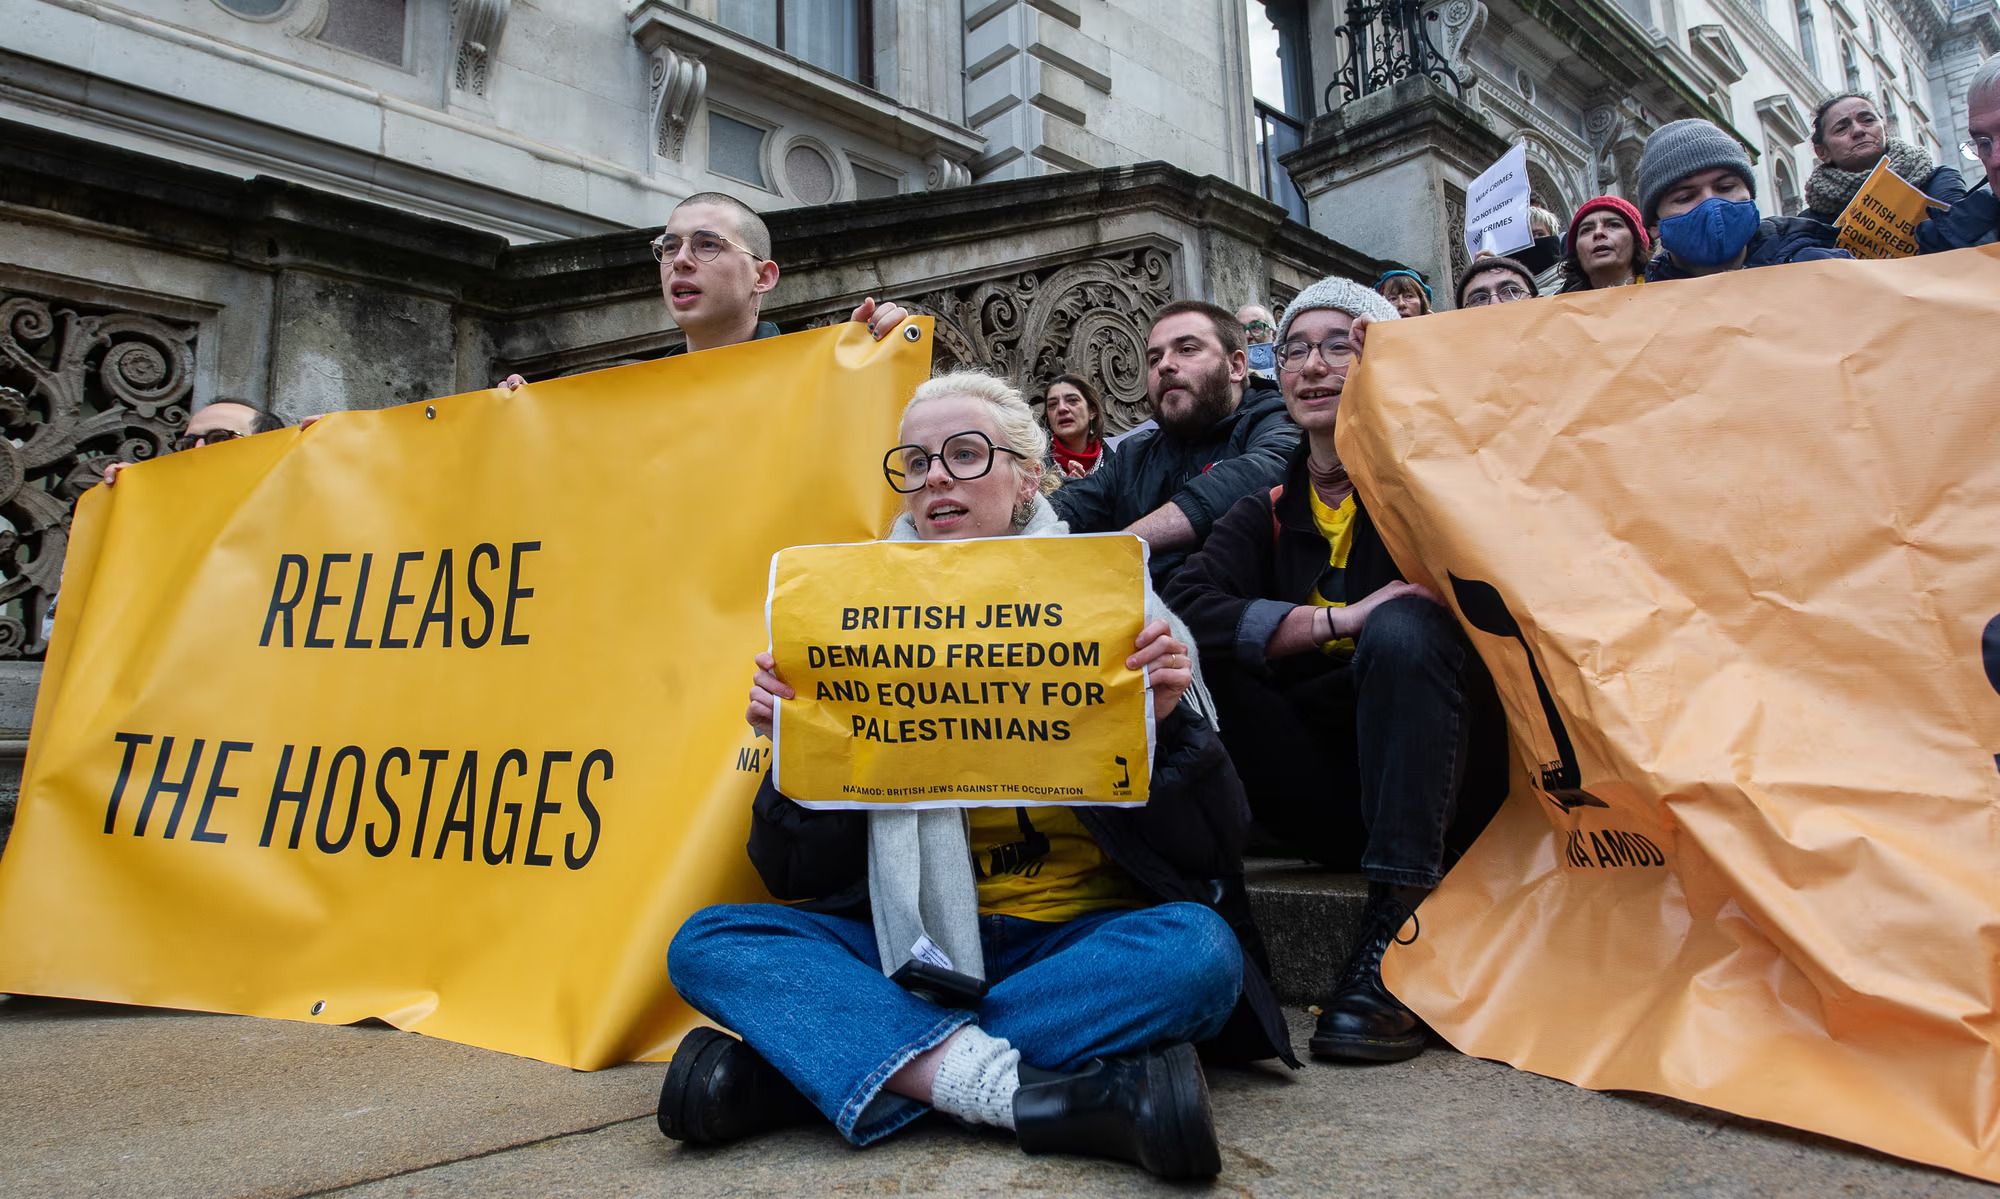 Activists from Naamod demand the release of hostages from Gaza. Photograph: Guy Smallman/Getty Images